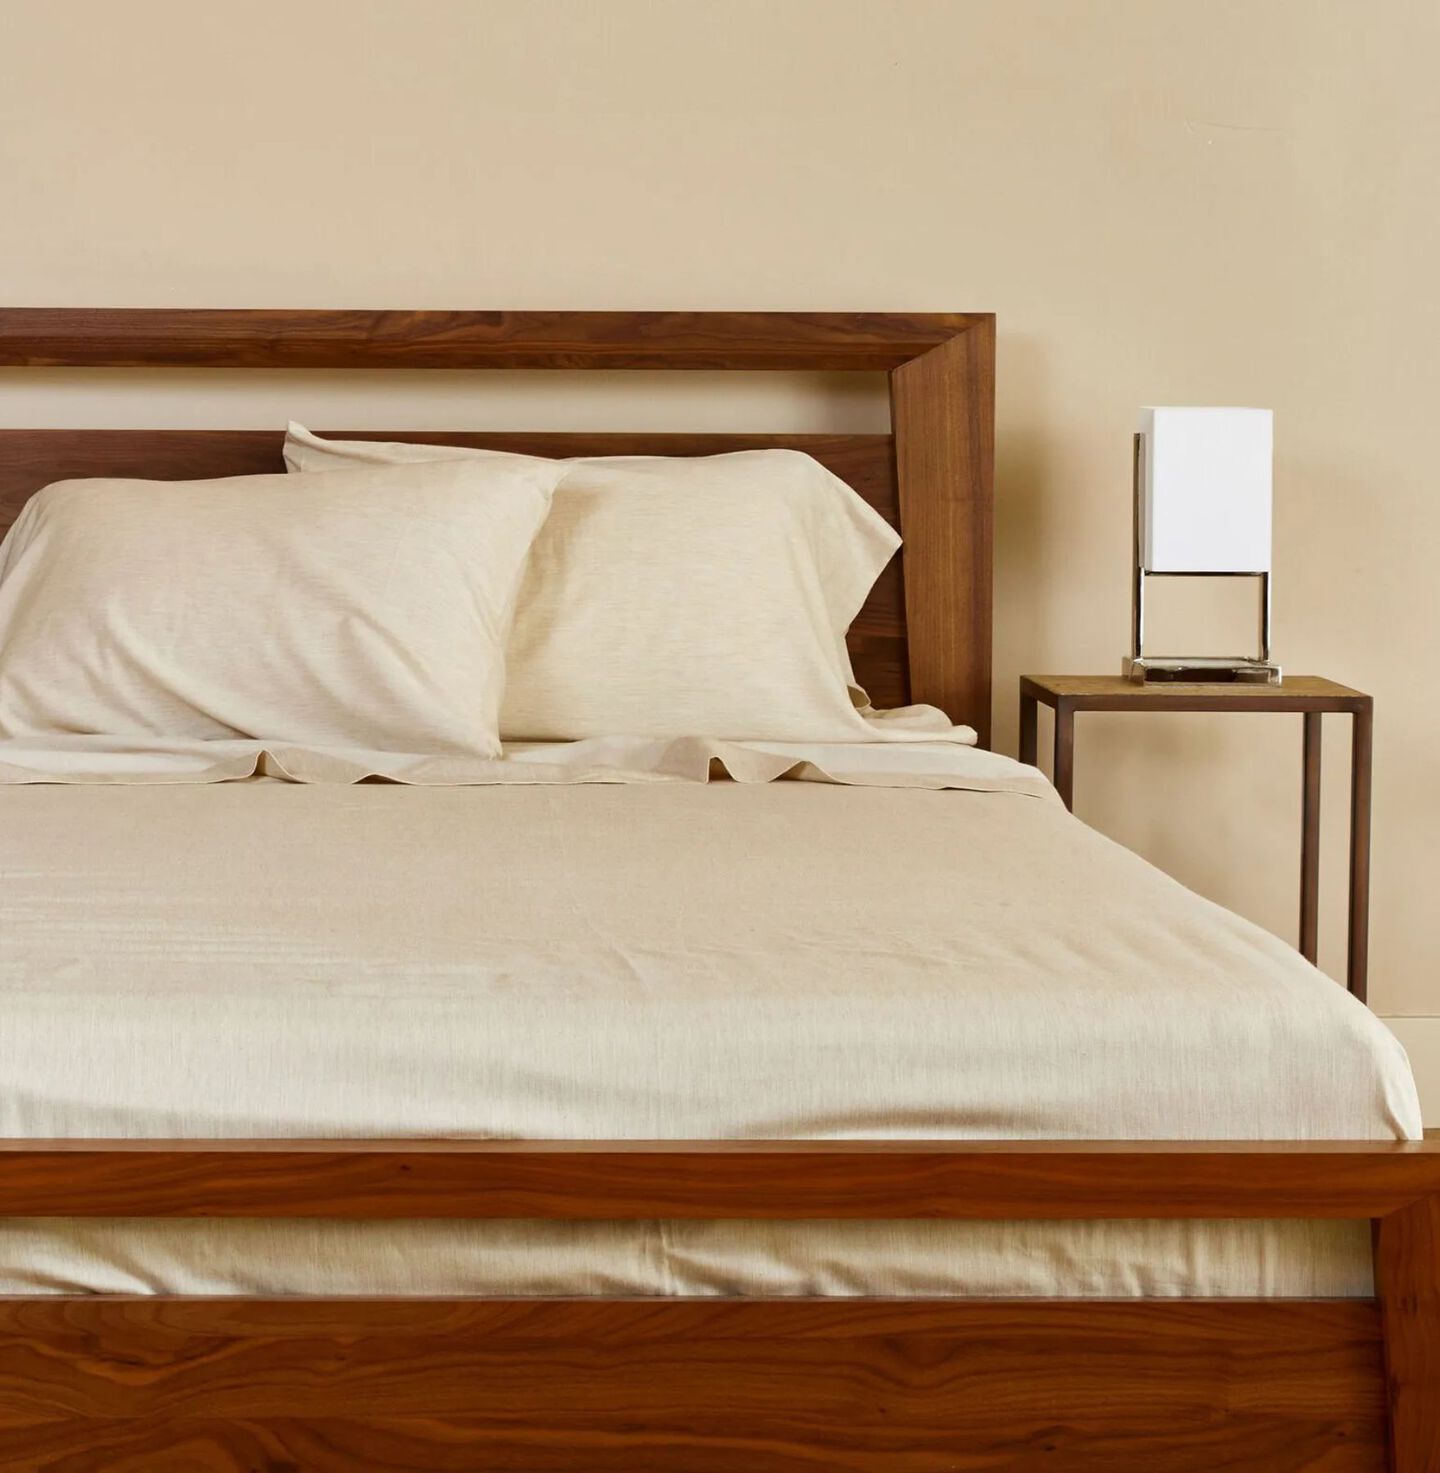 Bed with a dark wooden bedframe made with beige sheets next to a matching nightstand